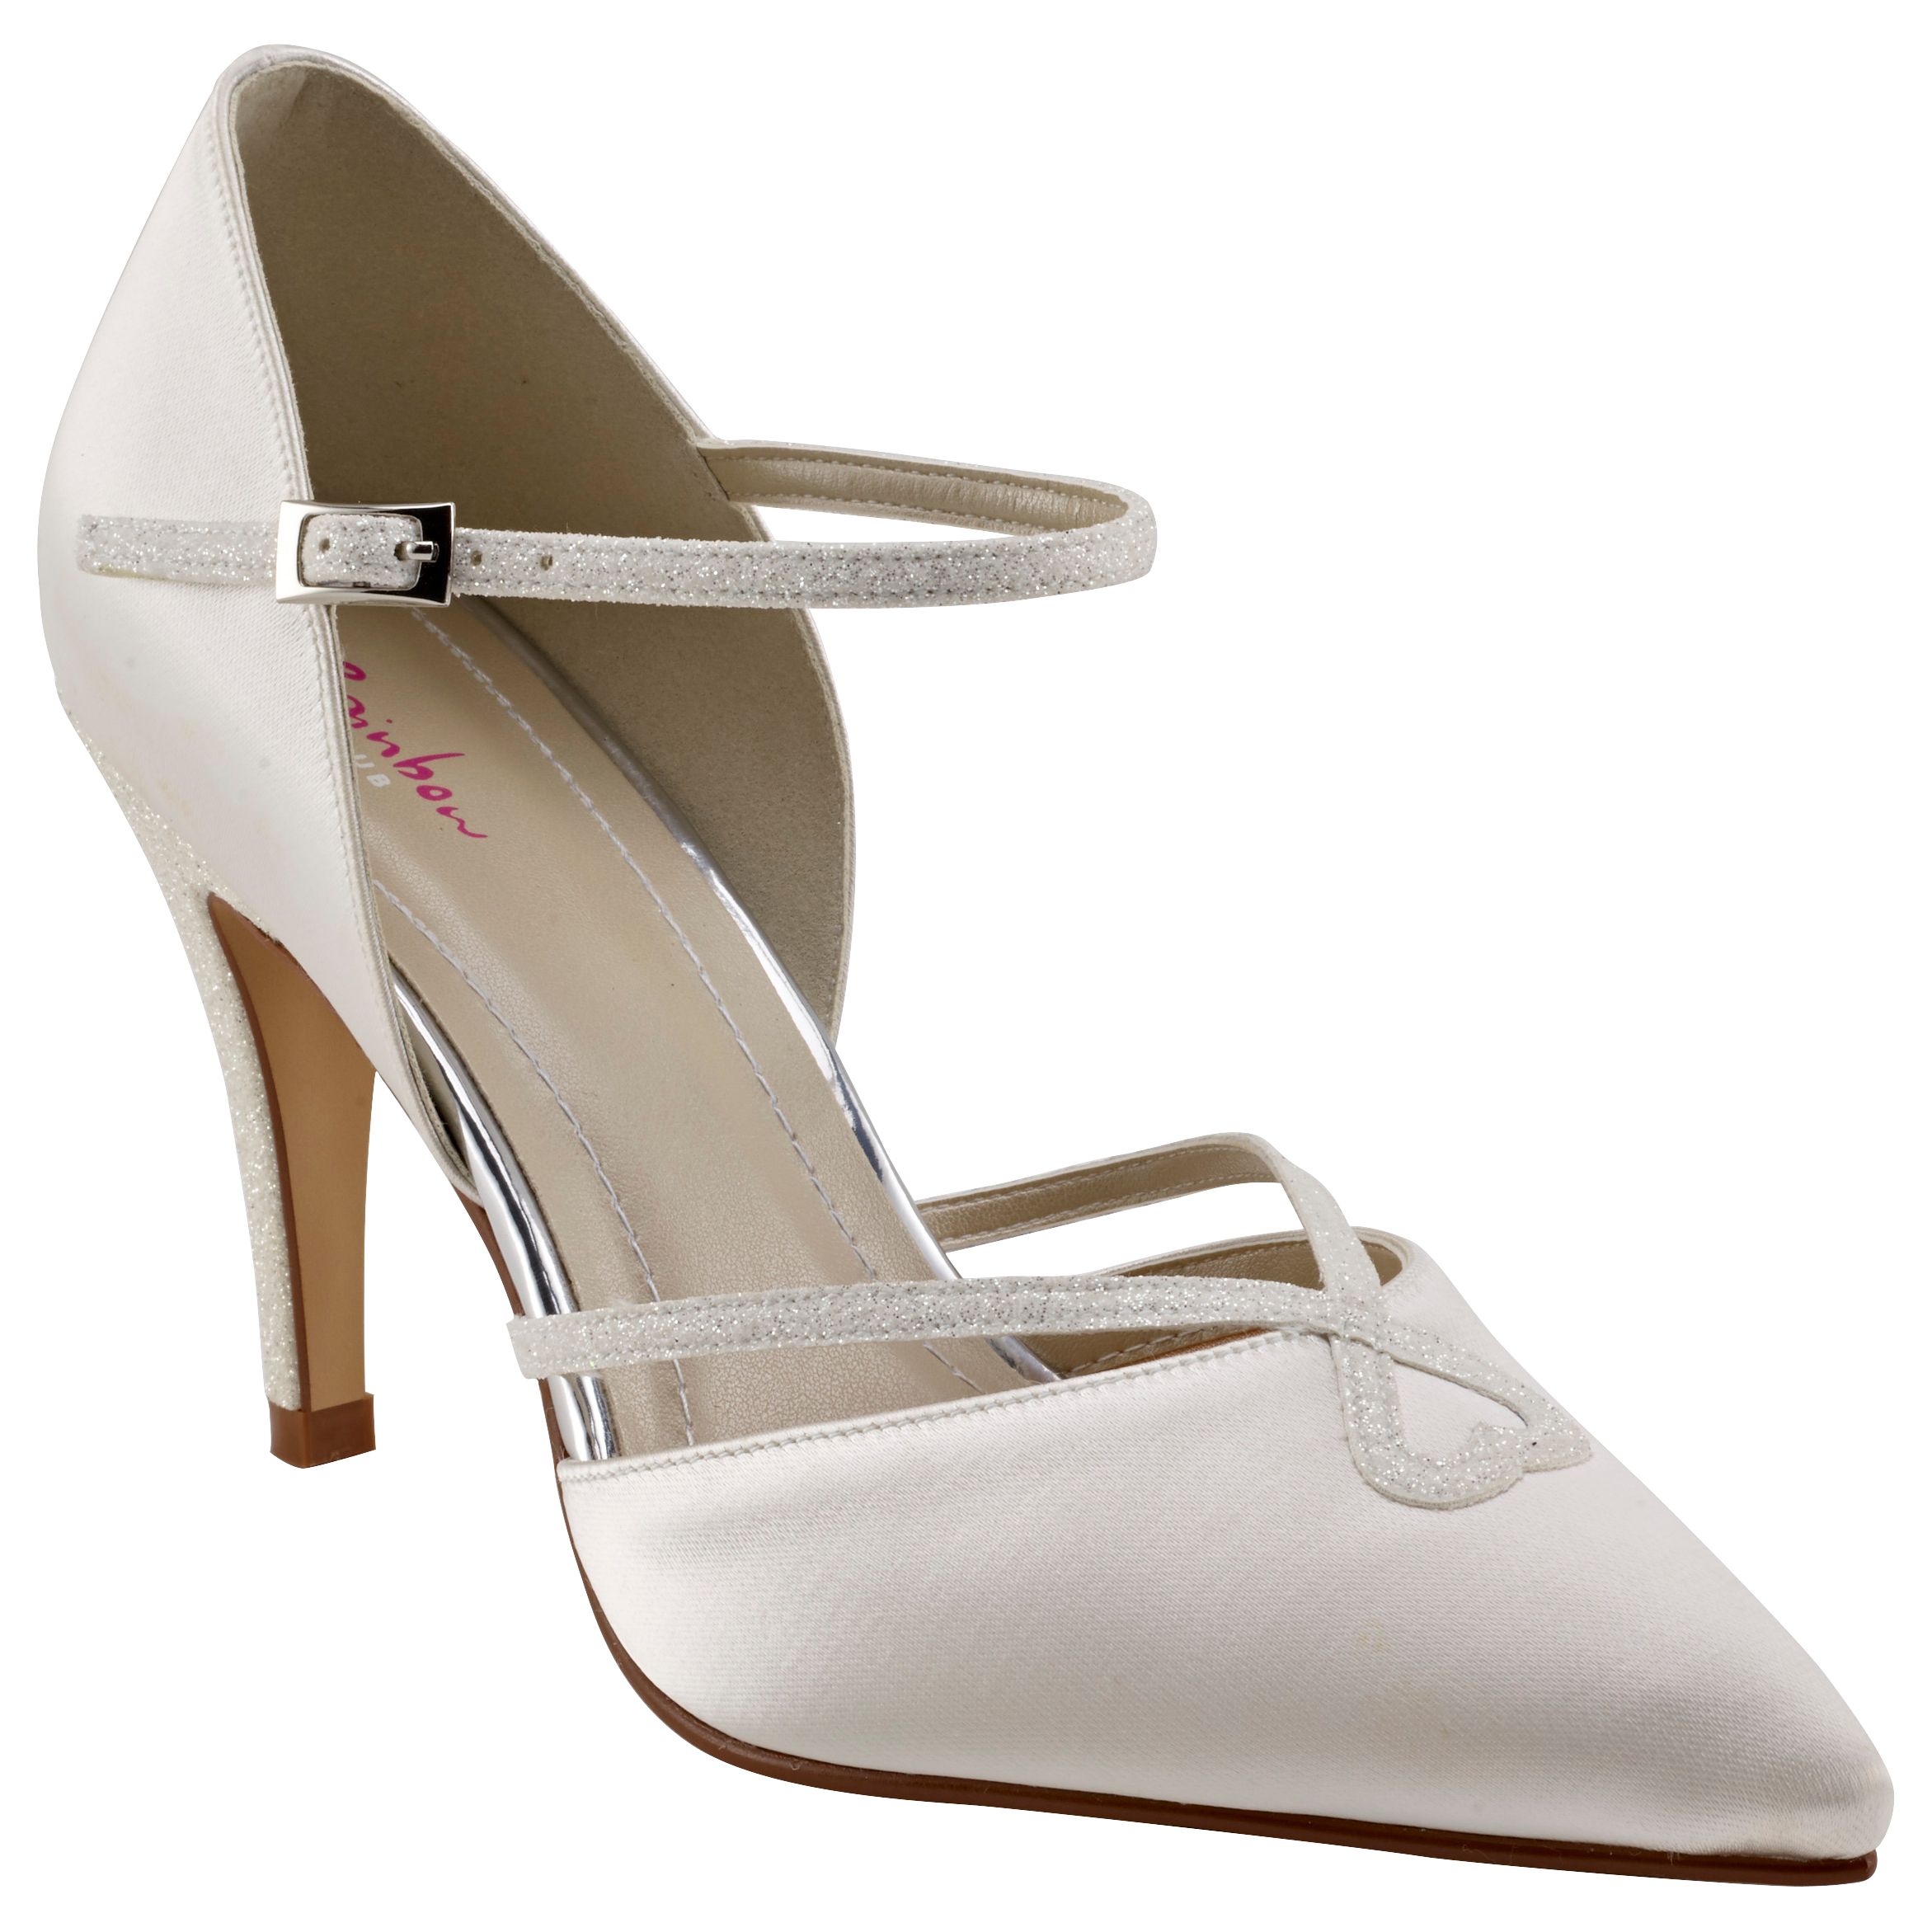 Rainbow Club Fleur Pointed Toe Court Shoes, Ivory